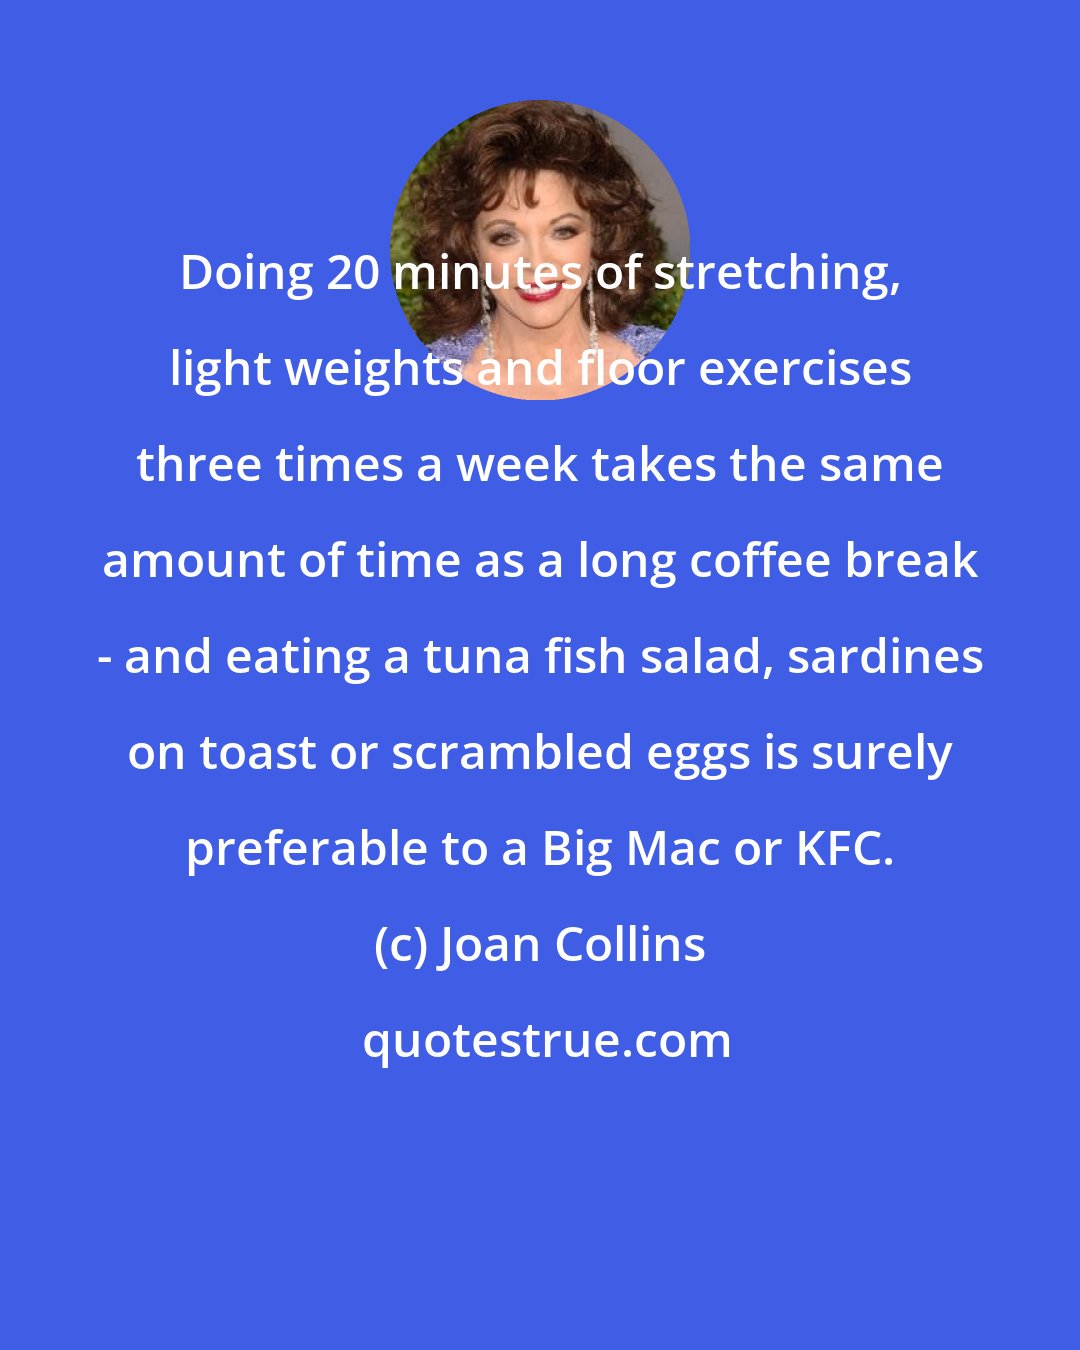 Joan Collins: Doing 20 minutes of stretching, light weights and floor exercises three times a week takes the same amount of time as a long coffee break - and eating a tuna fish salad, sardines on toast or scrambled eggs is surely preferable to a Big Mac or KFC.